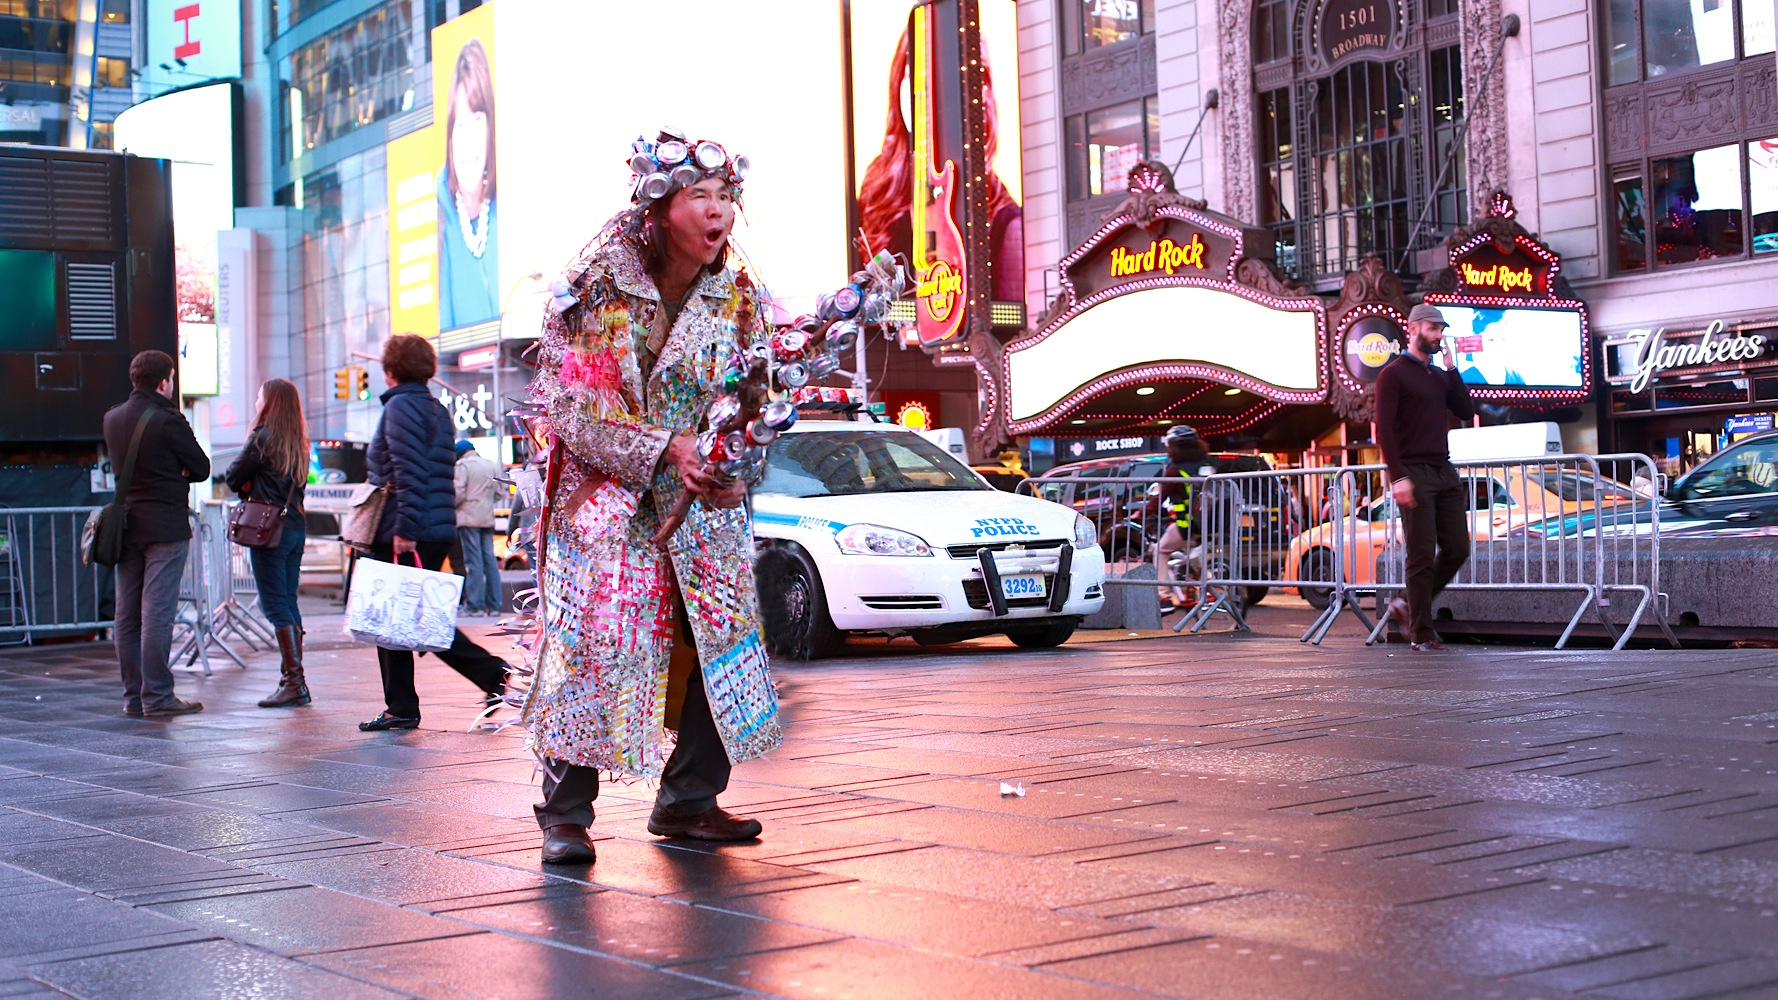 Multidisciplinary artist Chin Chih Yang performs in New York City's Time Square.